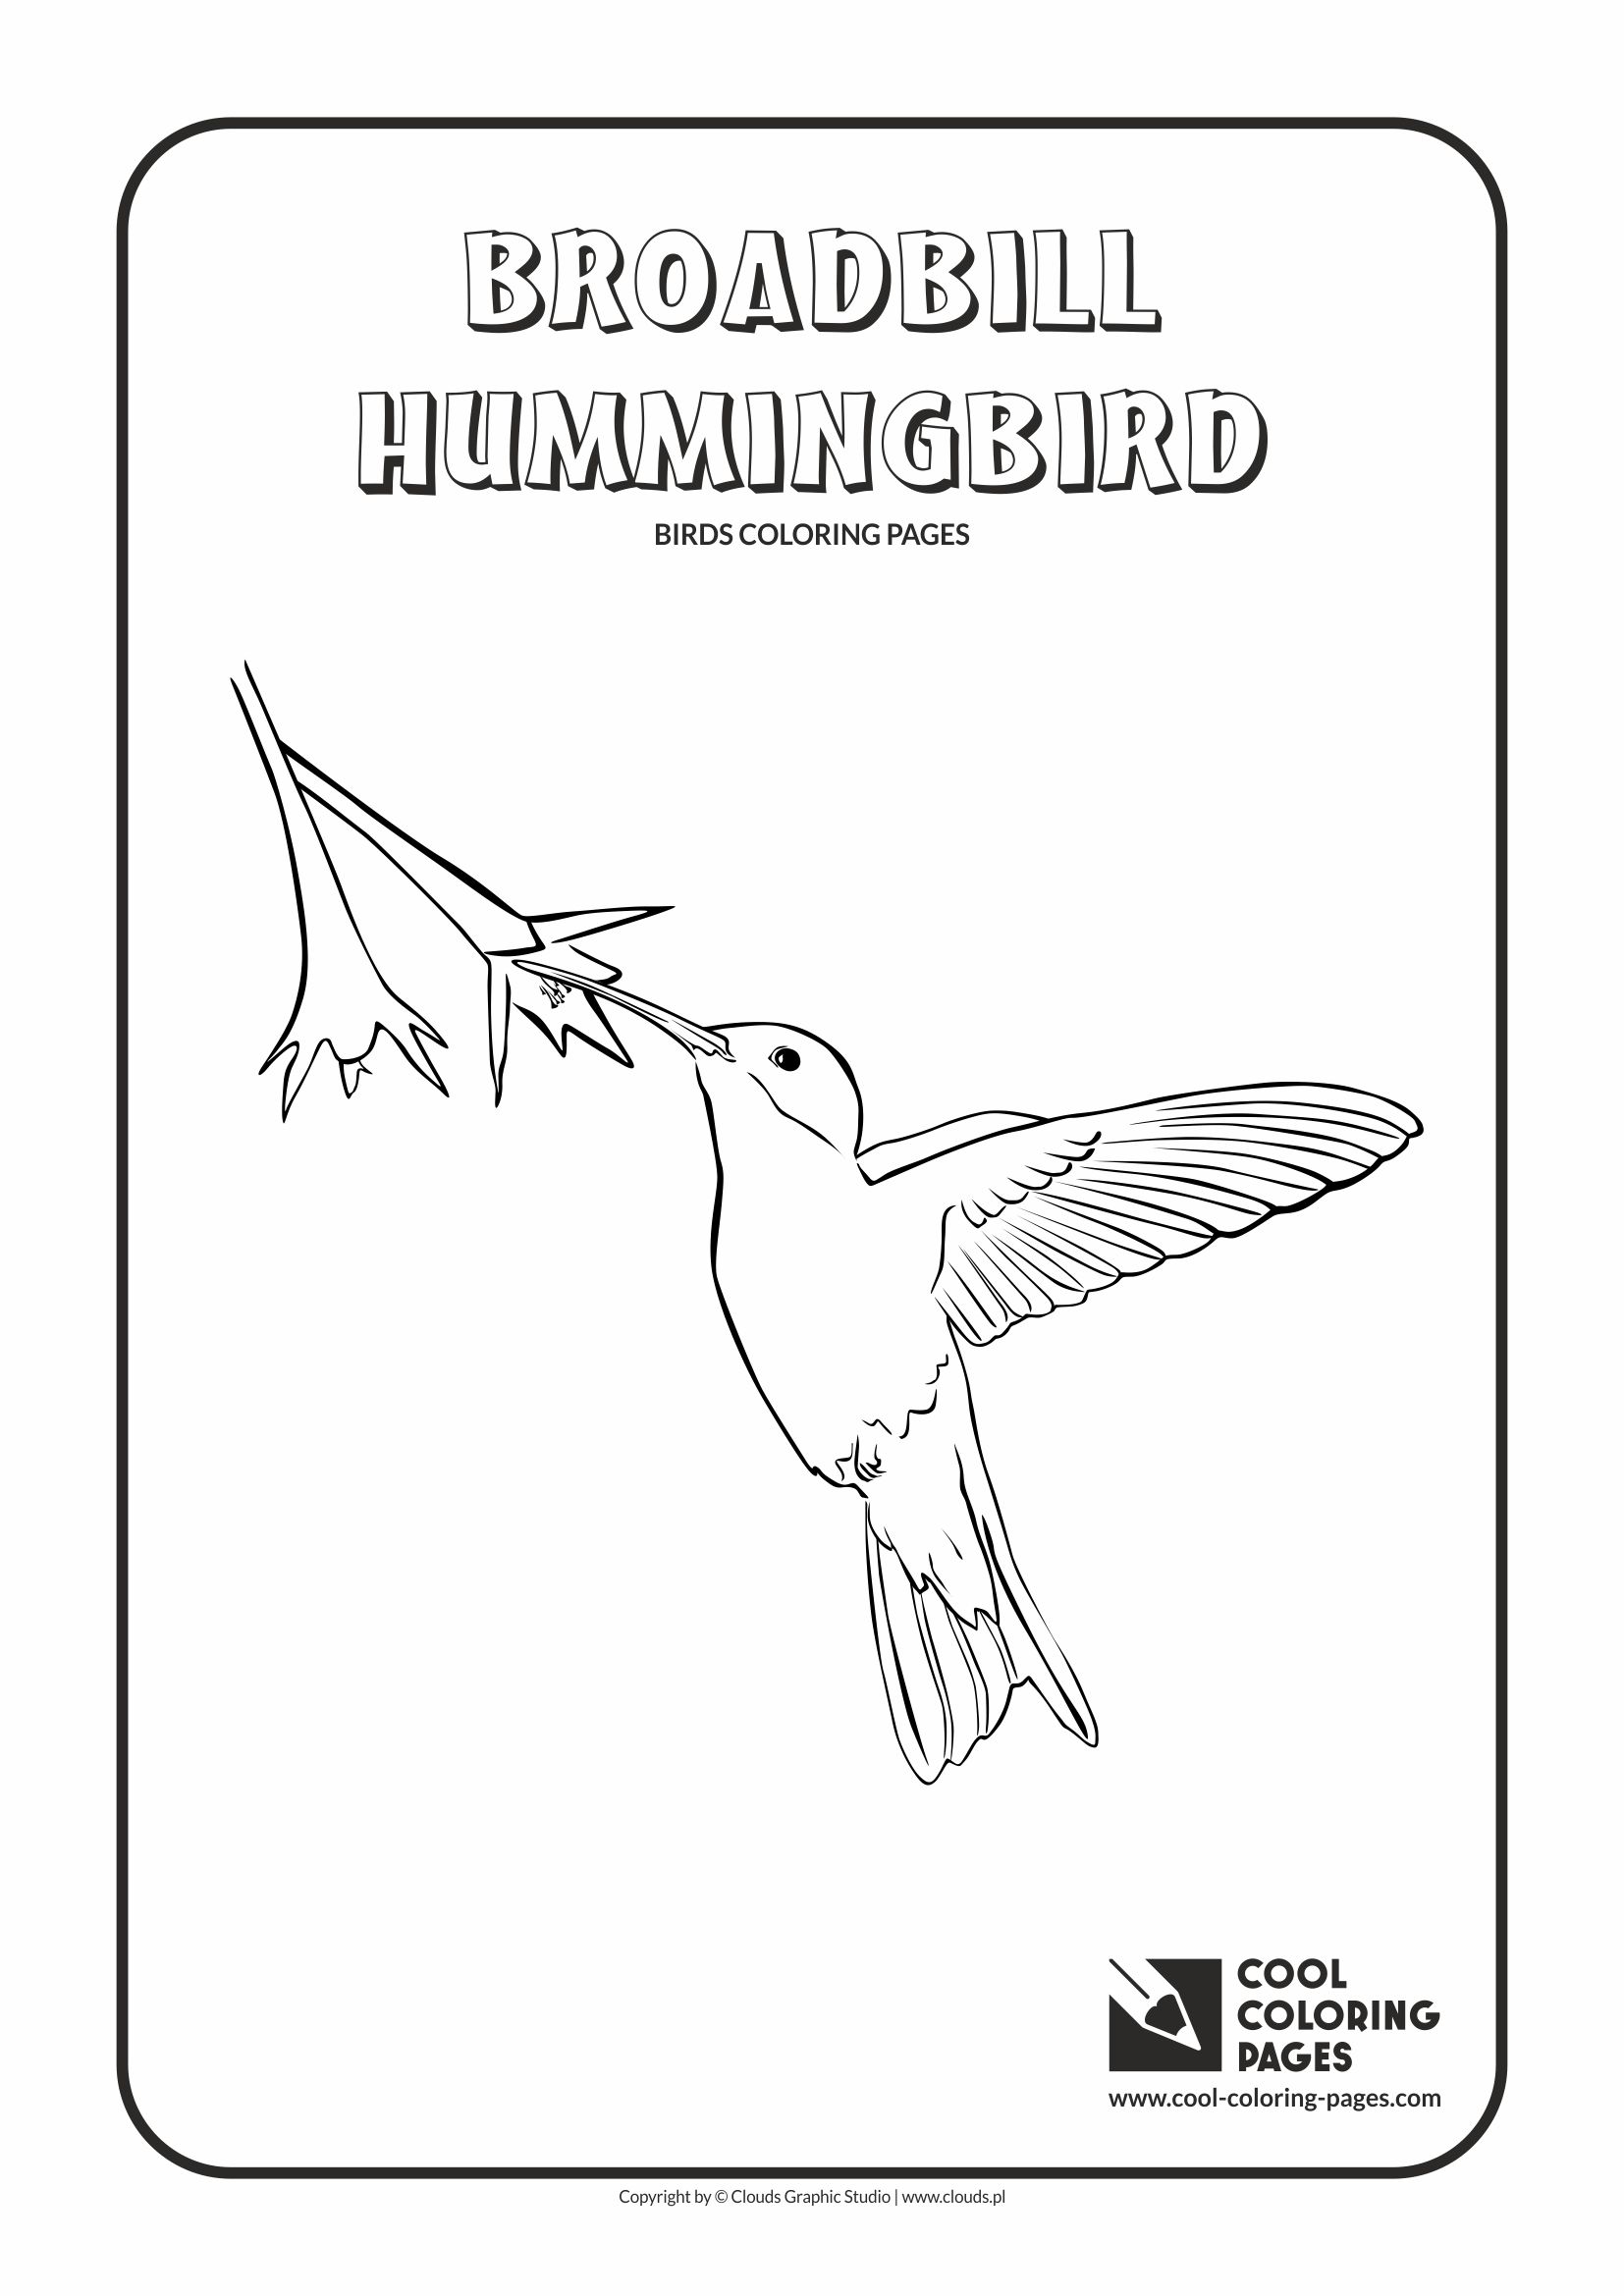 Cool Coloring Pages - Animals / Broadbill hummingbird / Coloring page with broadbill hummingbird